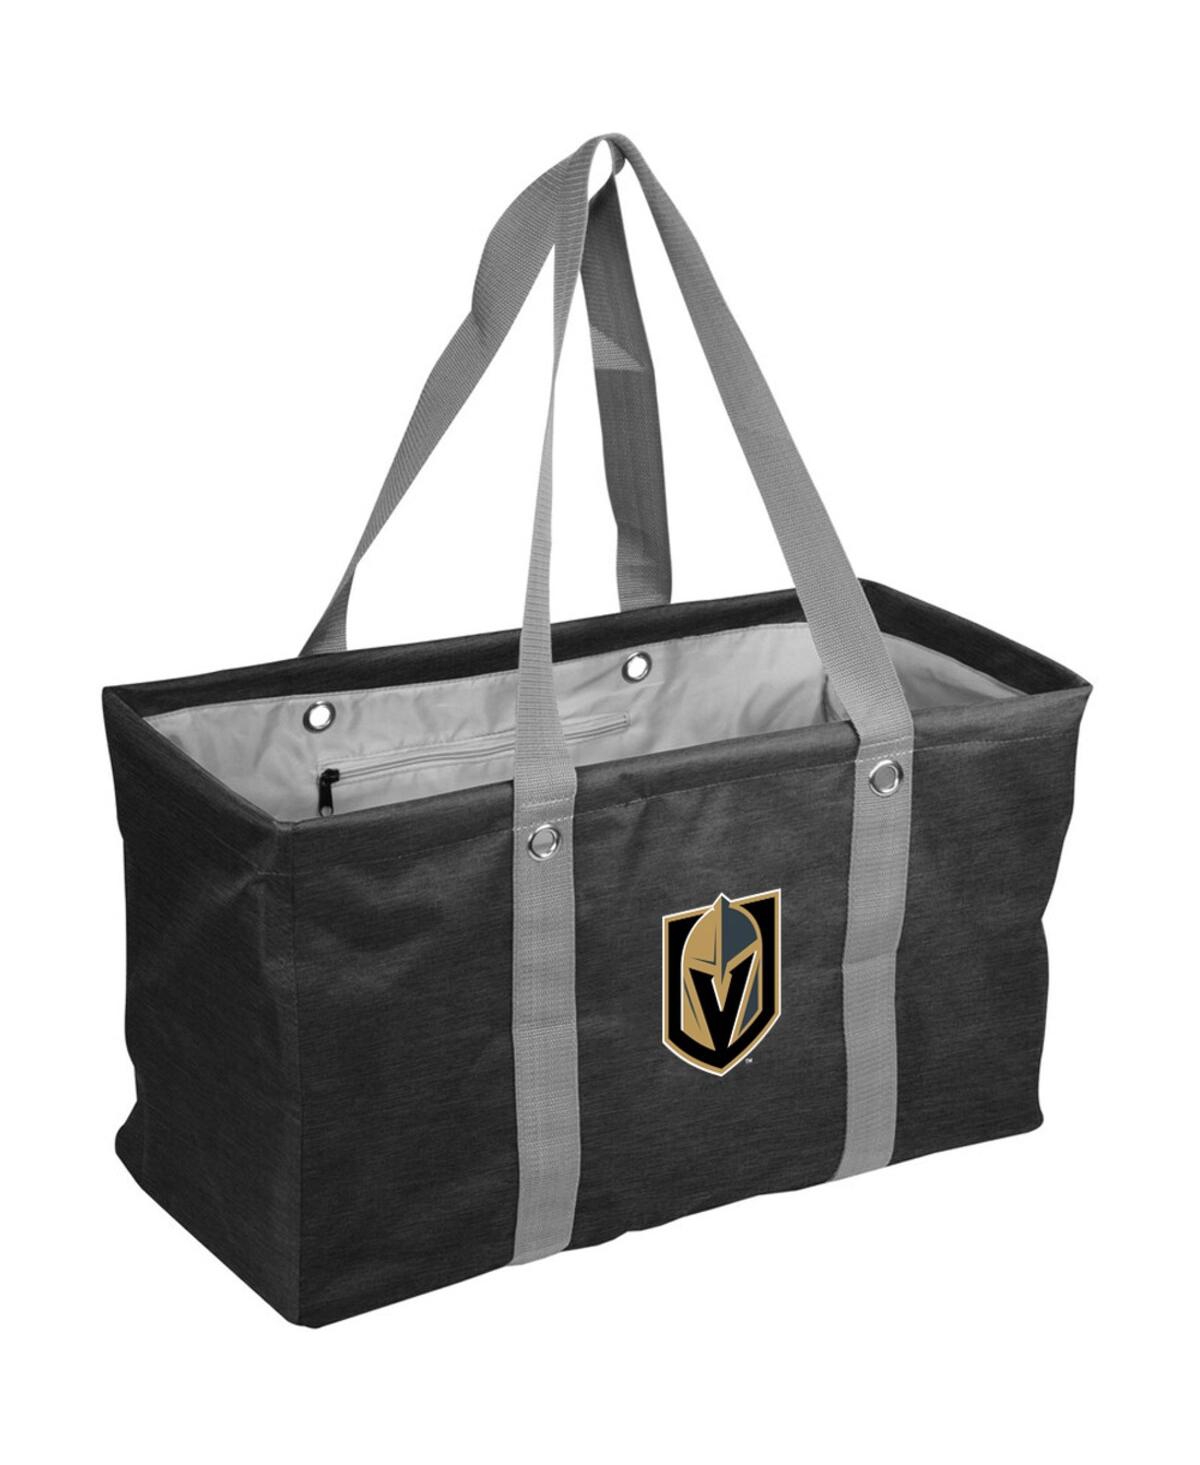 Men's and Women's Vegas Golden Knights Crosshatch Picnic Caddy Tote Bag - Black